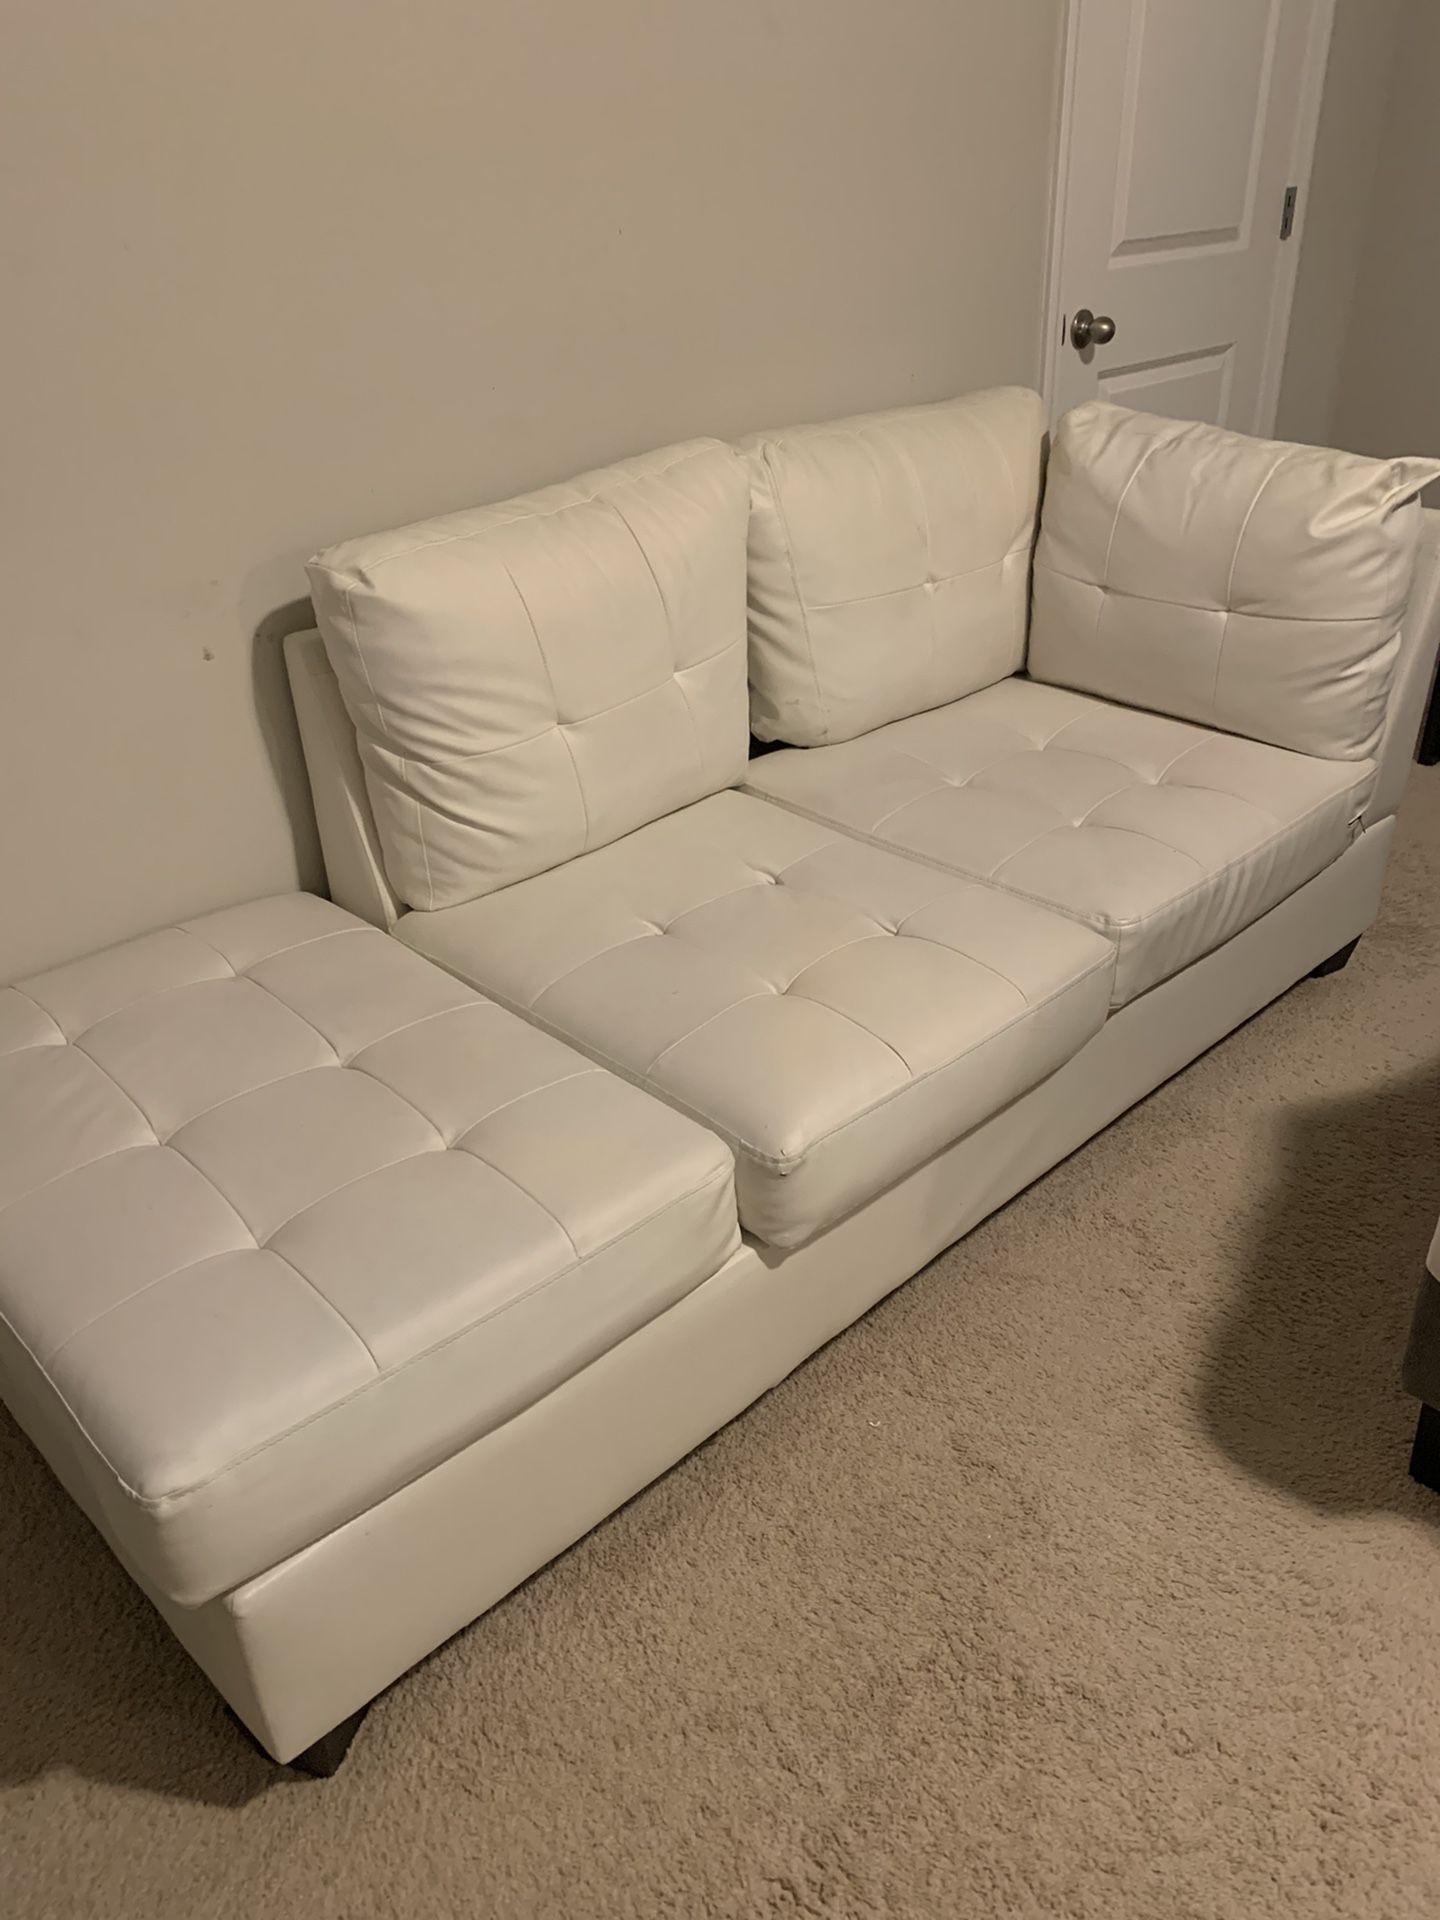 2 piece White leather couch.